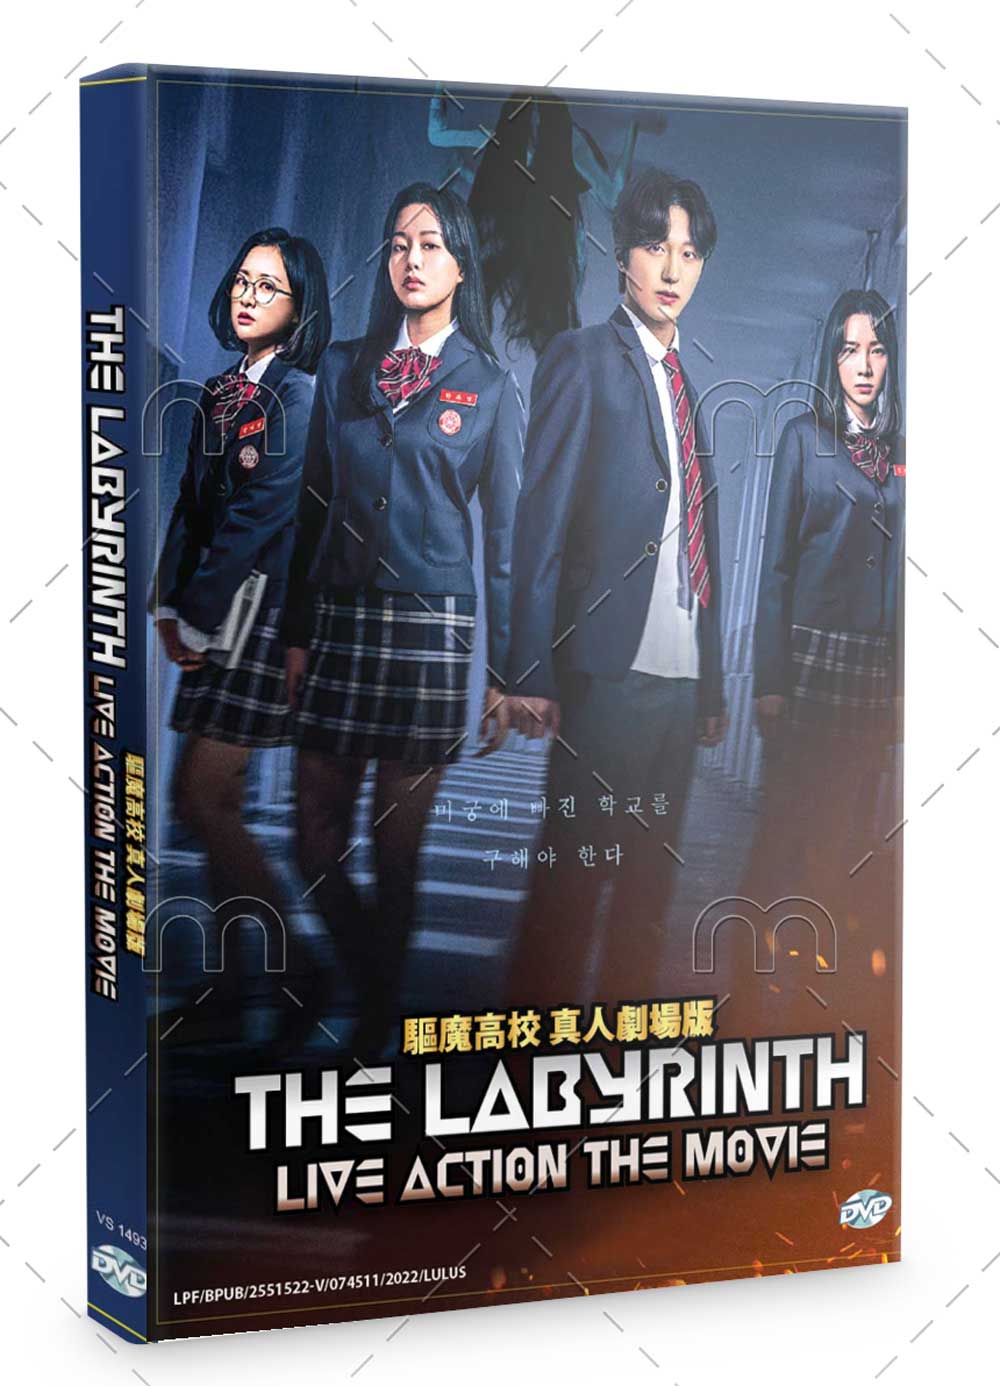 The Labyrinth Live Action The Movie (DVD) (2021) 韓国映画